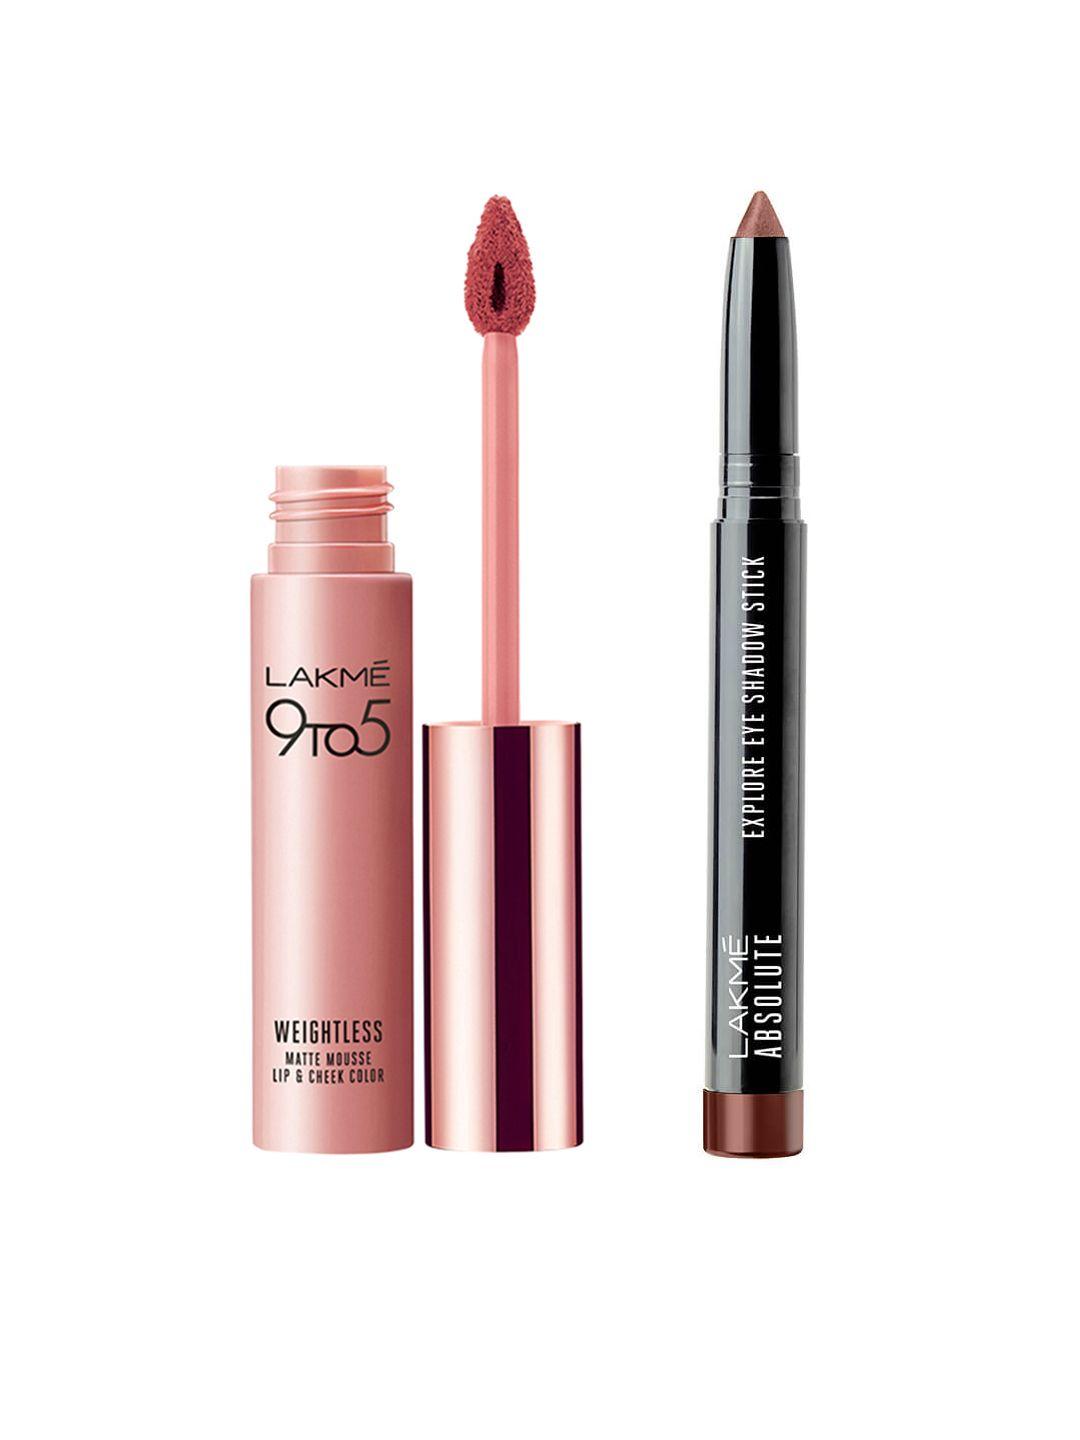 lakme 9to5 weightless mousse lipstick - nude cushion & explore eyeshadow stick - champagne